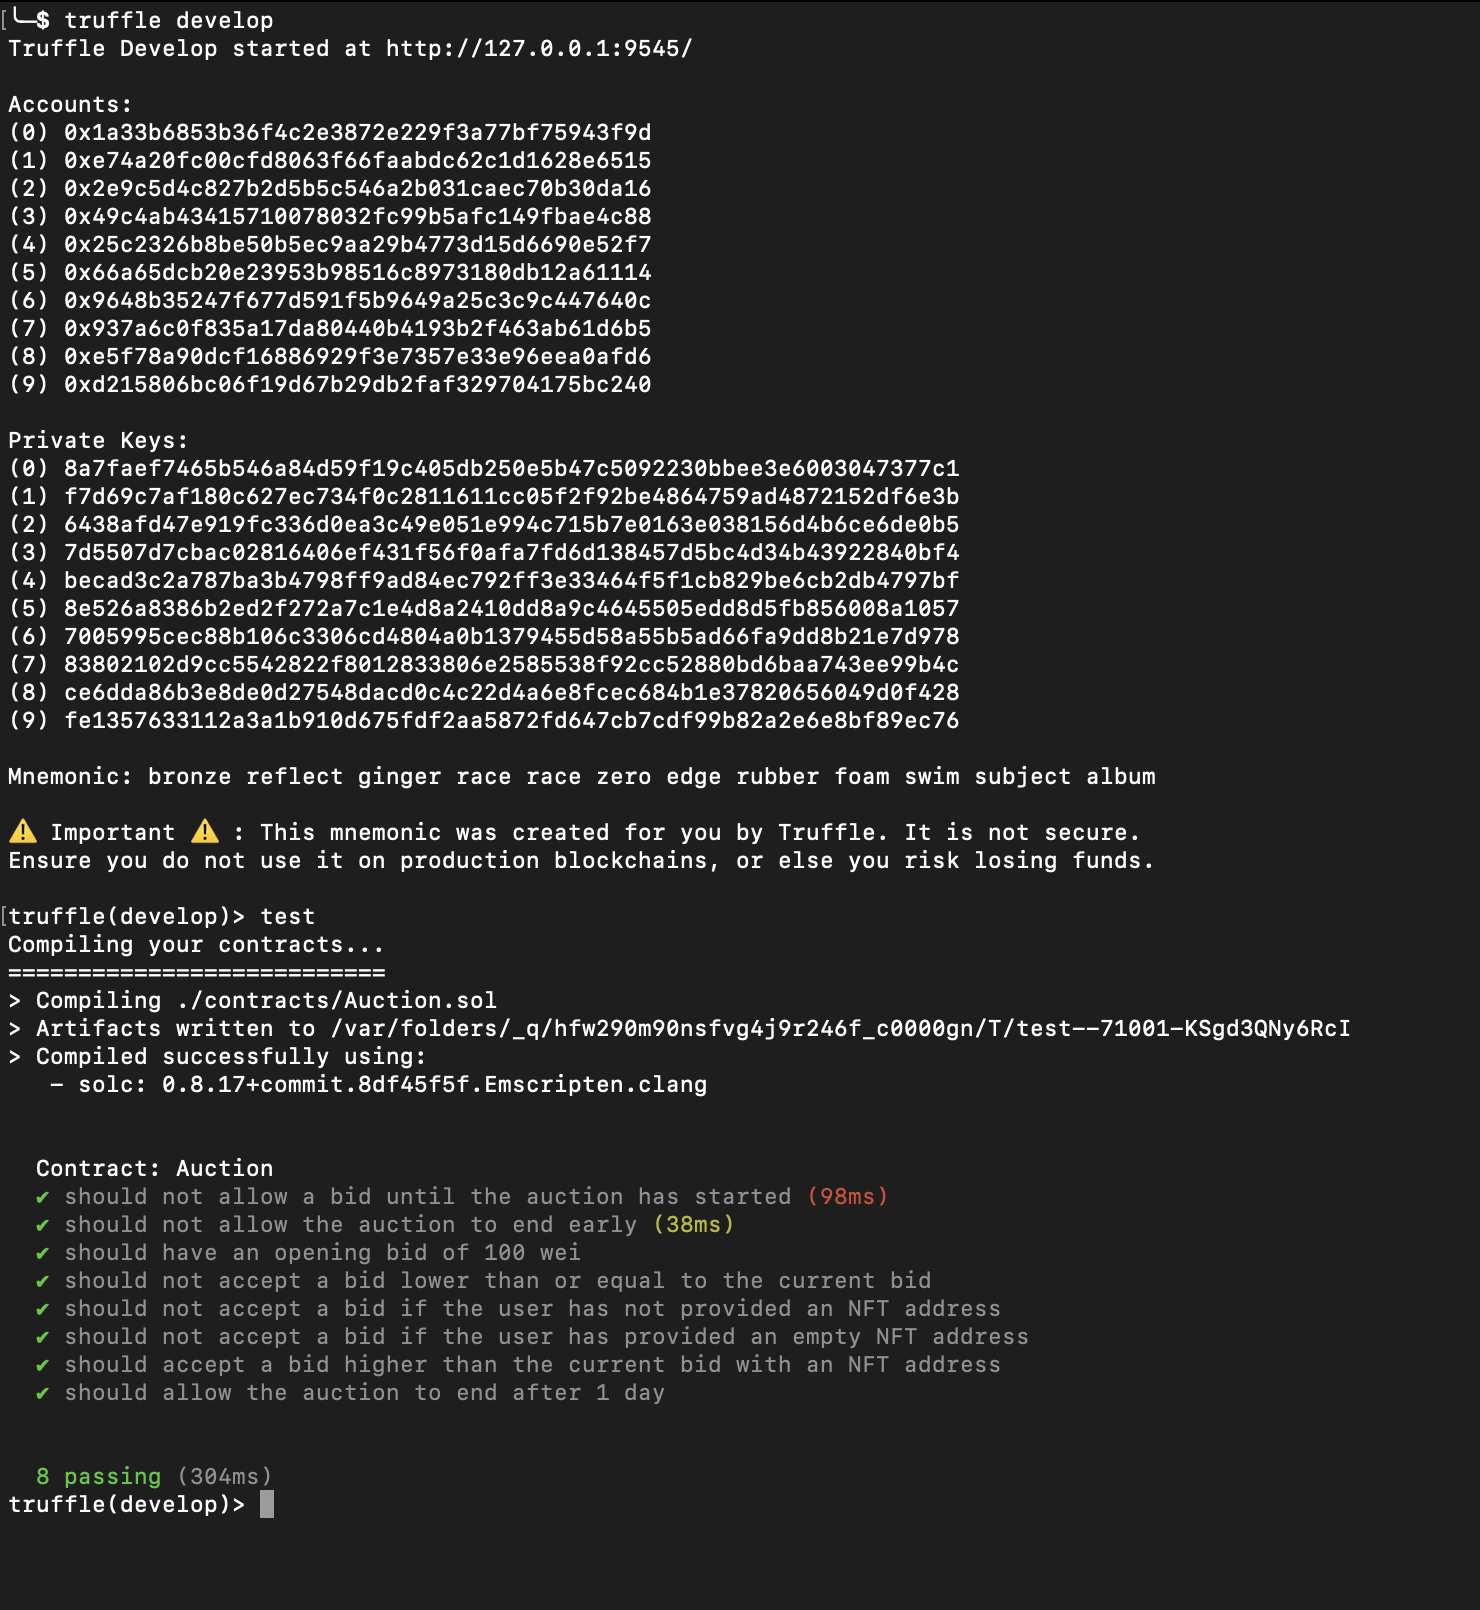 Image of terminal after running test cases